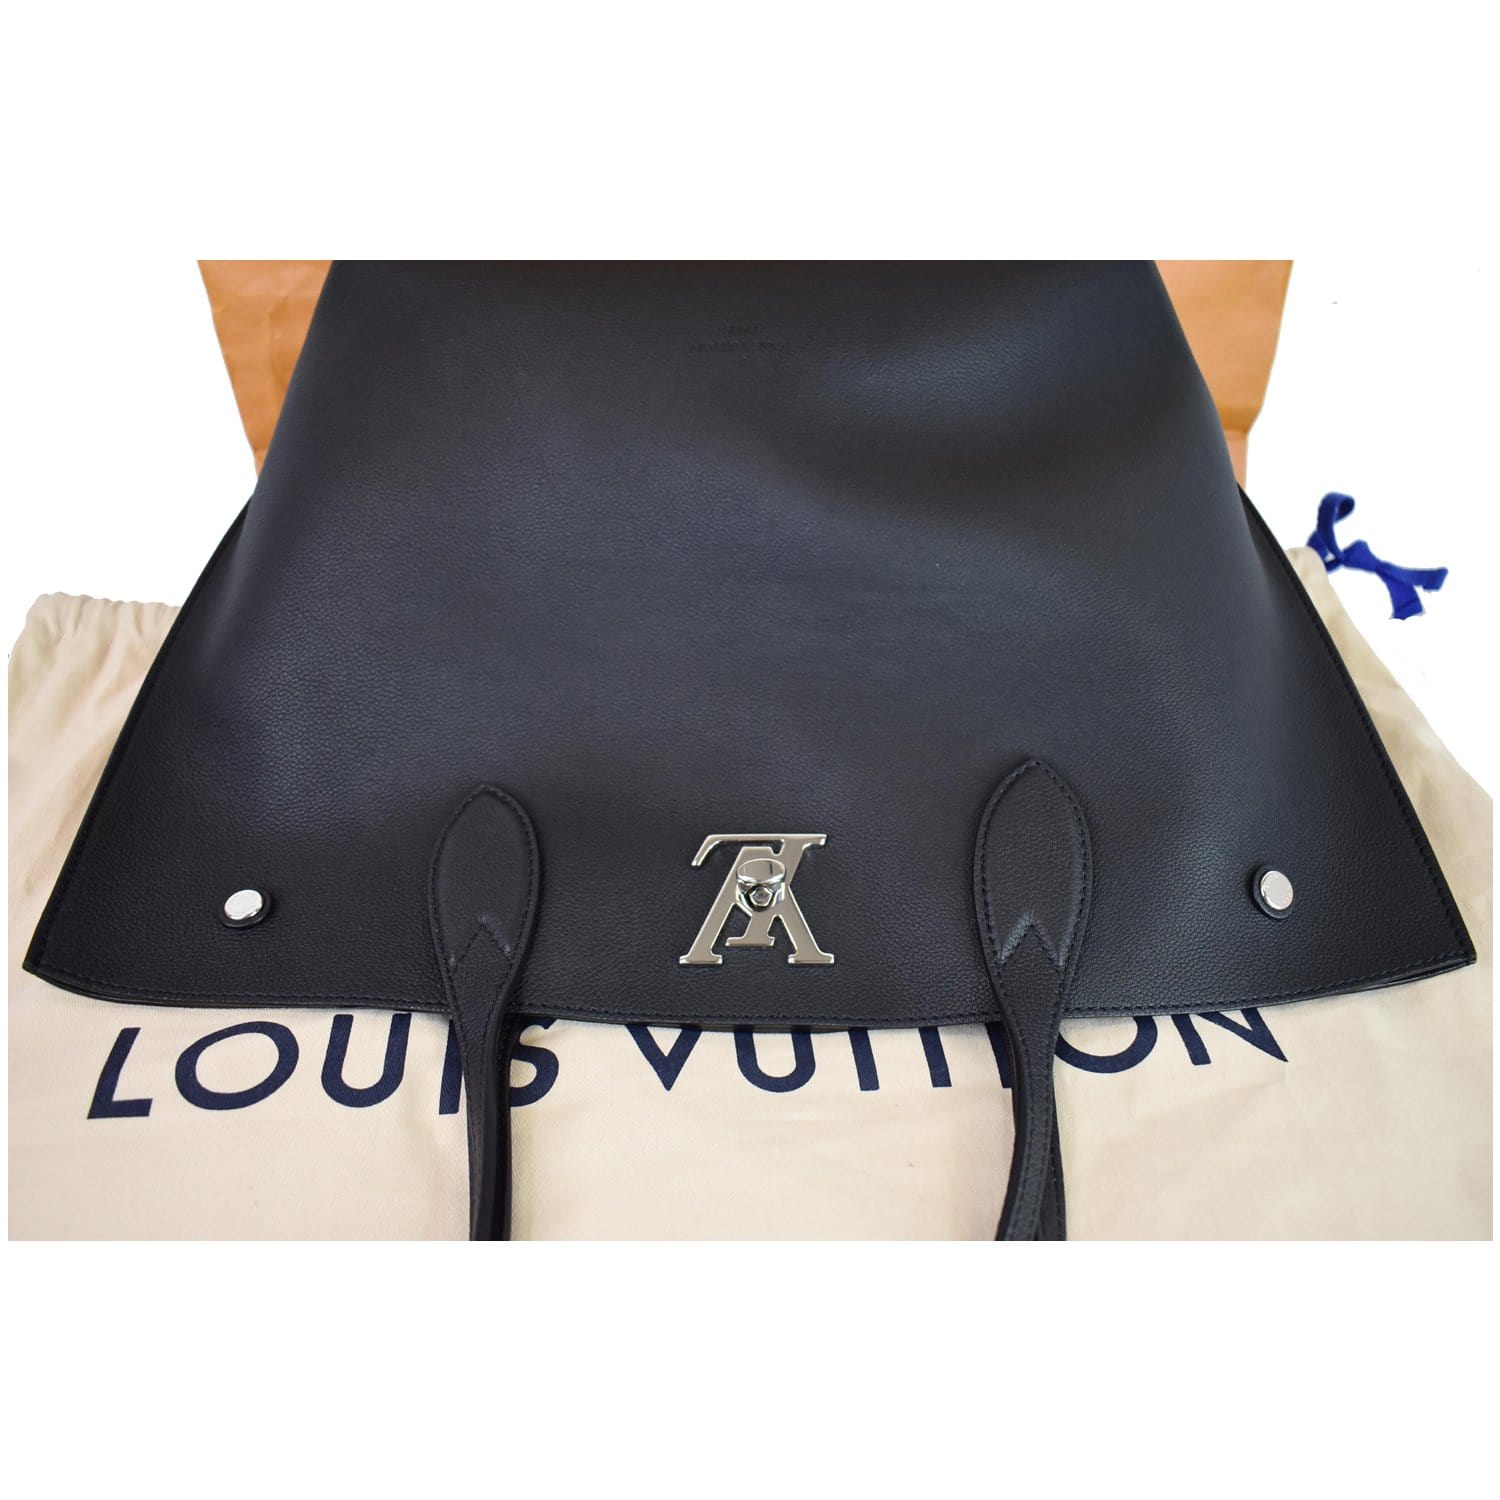 Lockme leather tote Louis Vuitton Black in Leather - 34615765